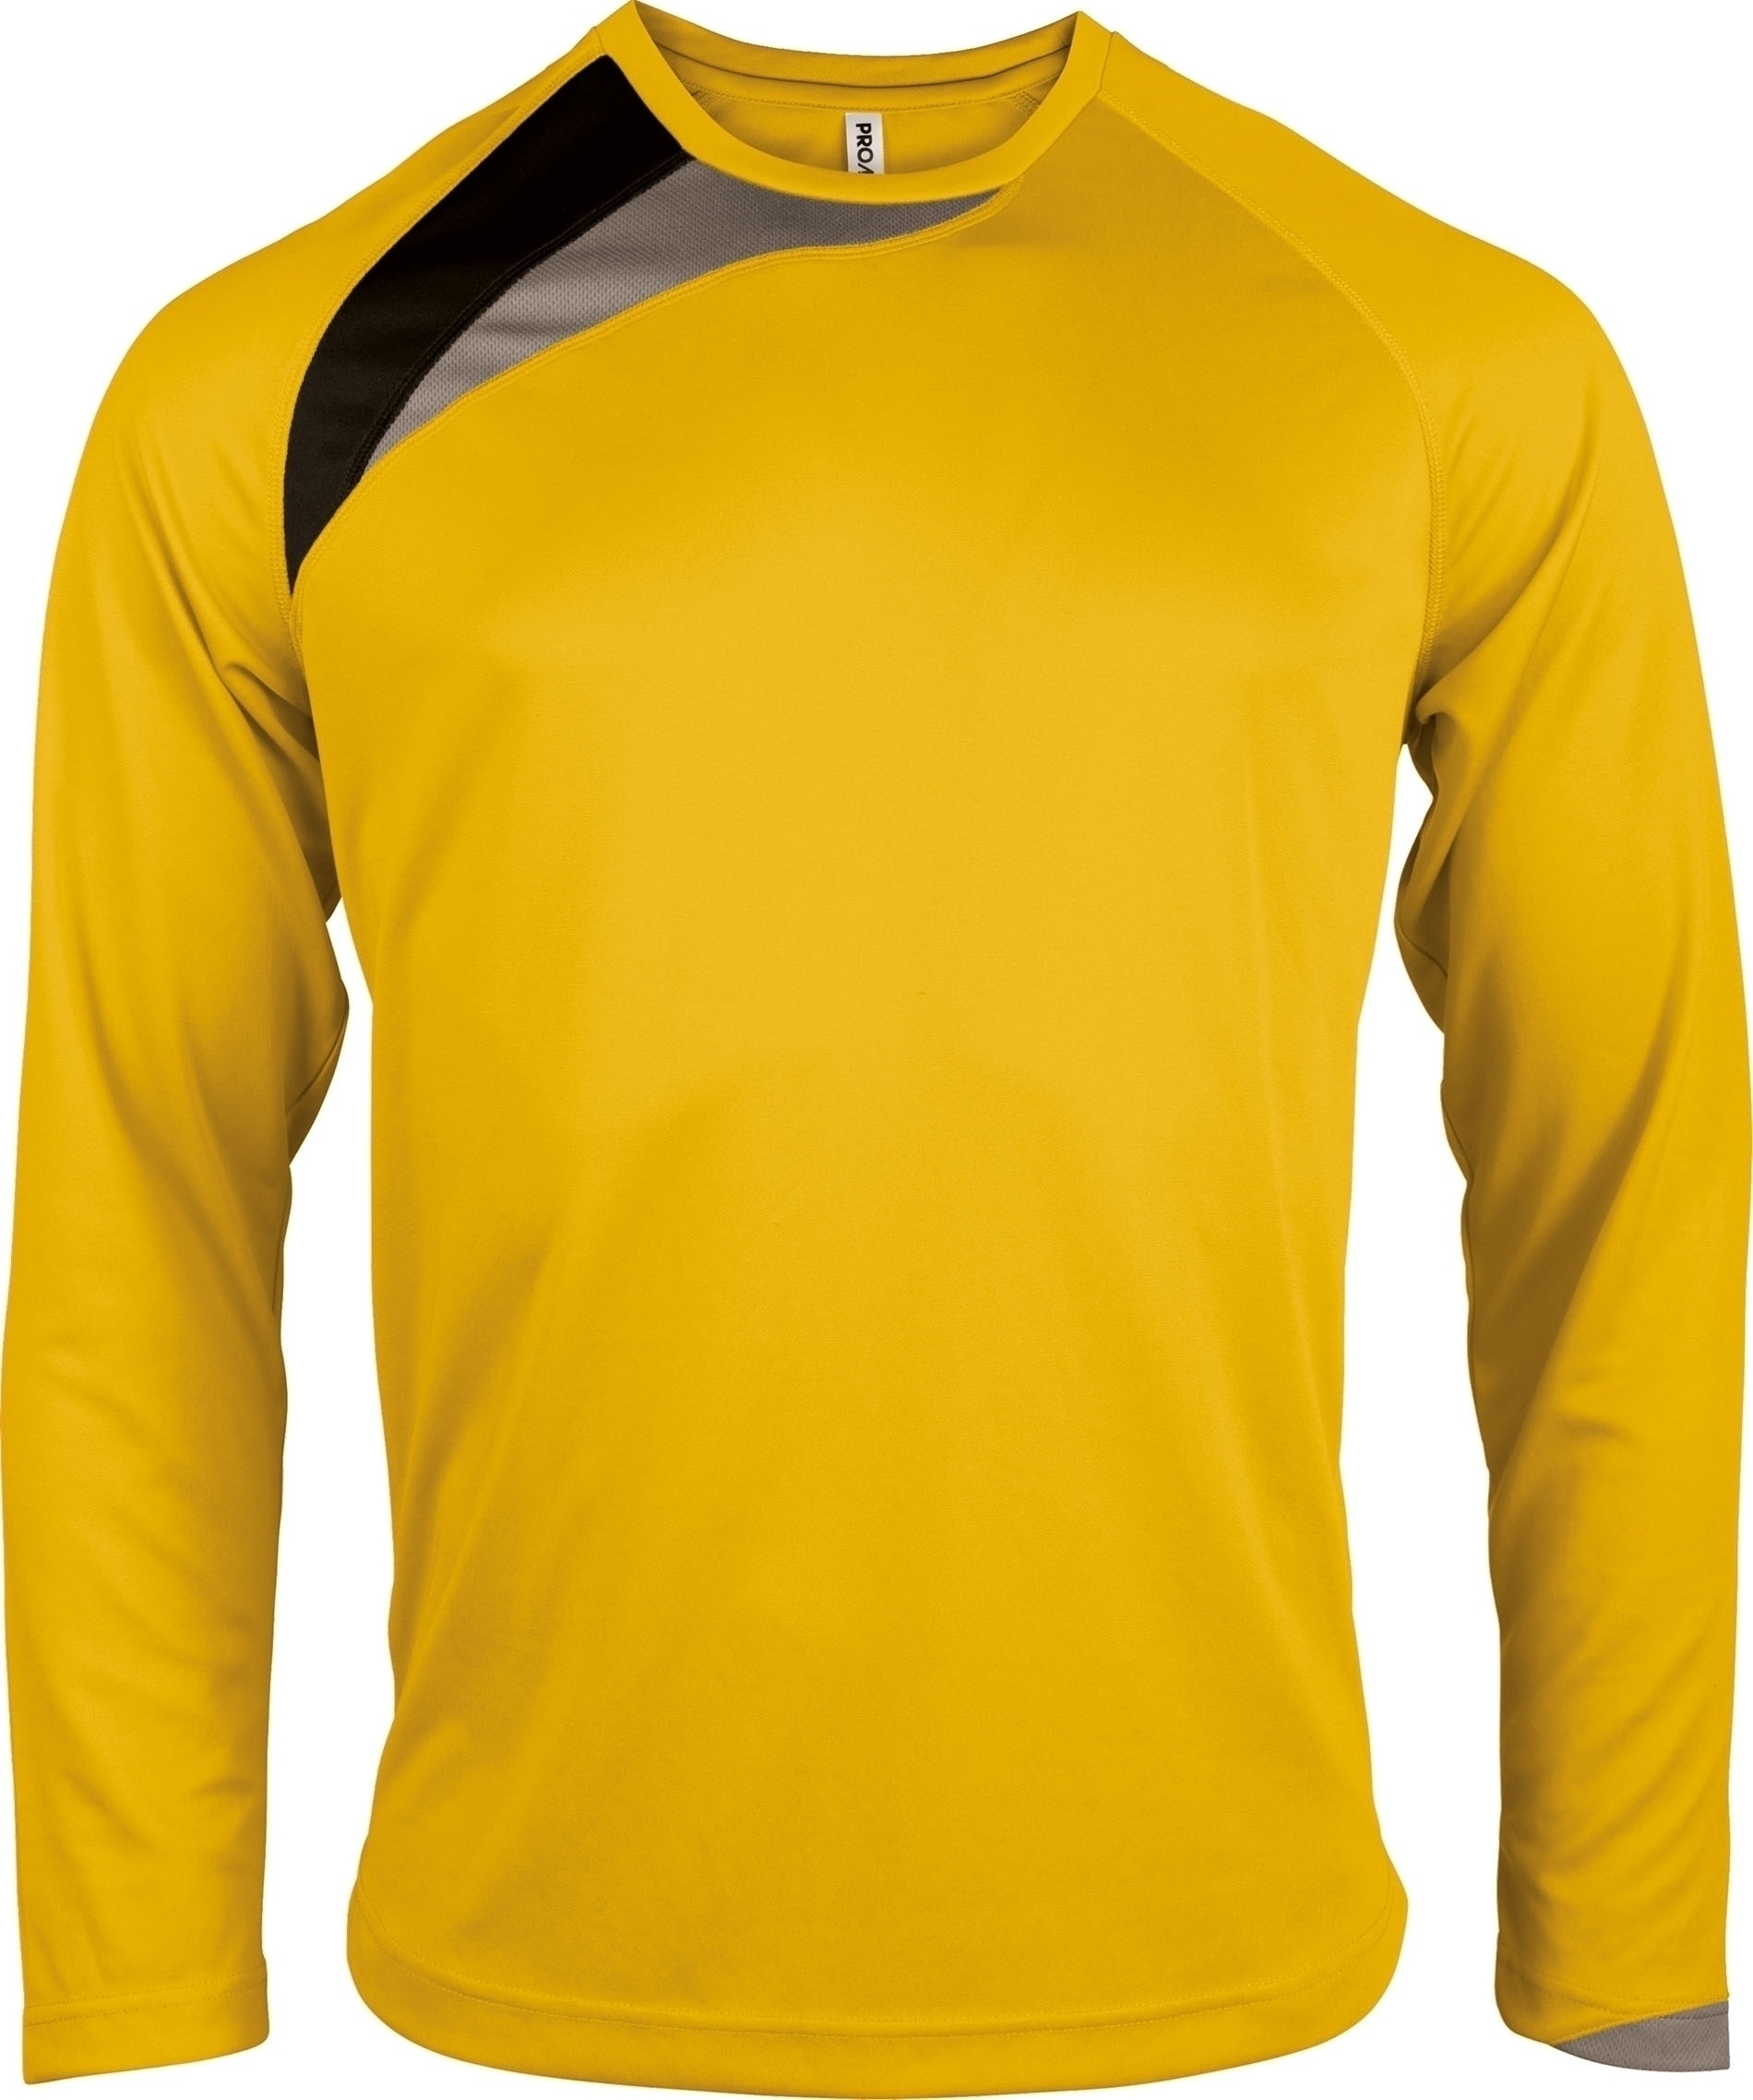 MAILLOT MANCHES LONGUES ADULTE Sporty Yellow / Black / Storm Grey Jaune